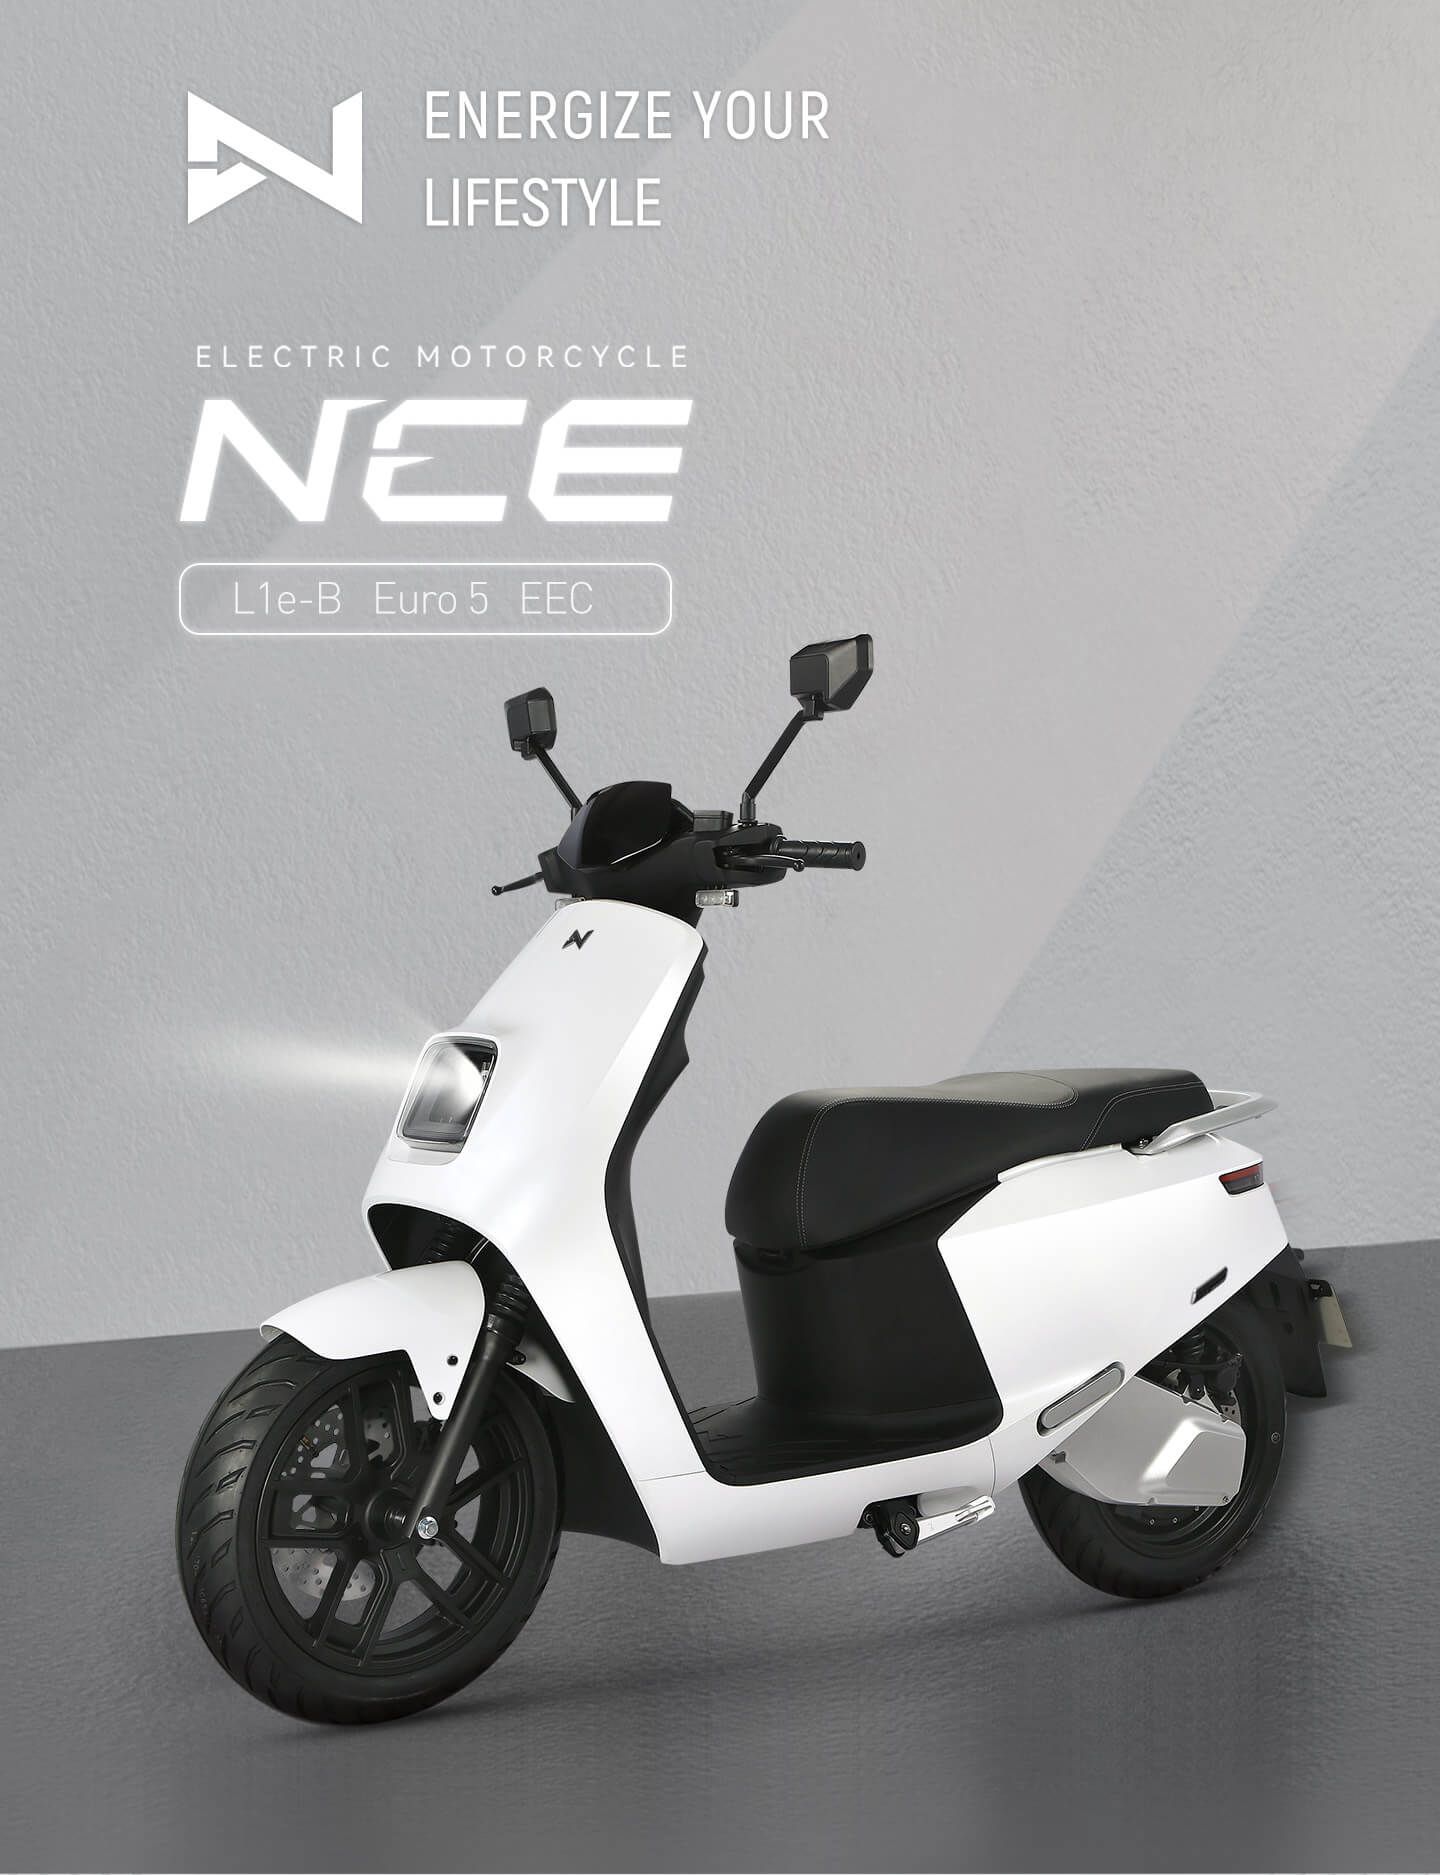 lvneng NCE 3900w Electric motorcycle EEC L1e-B Euro5